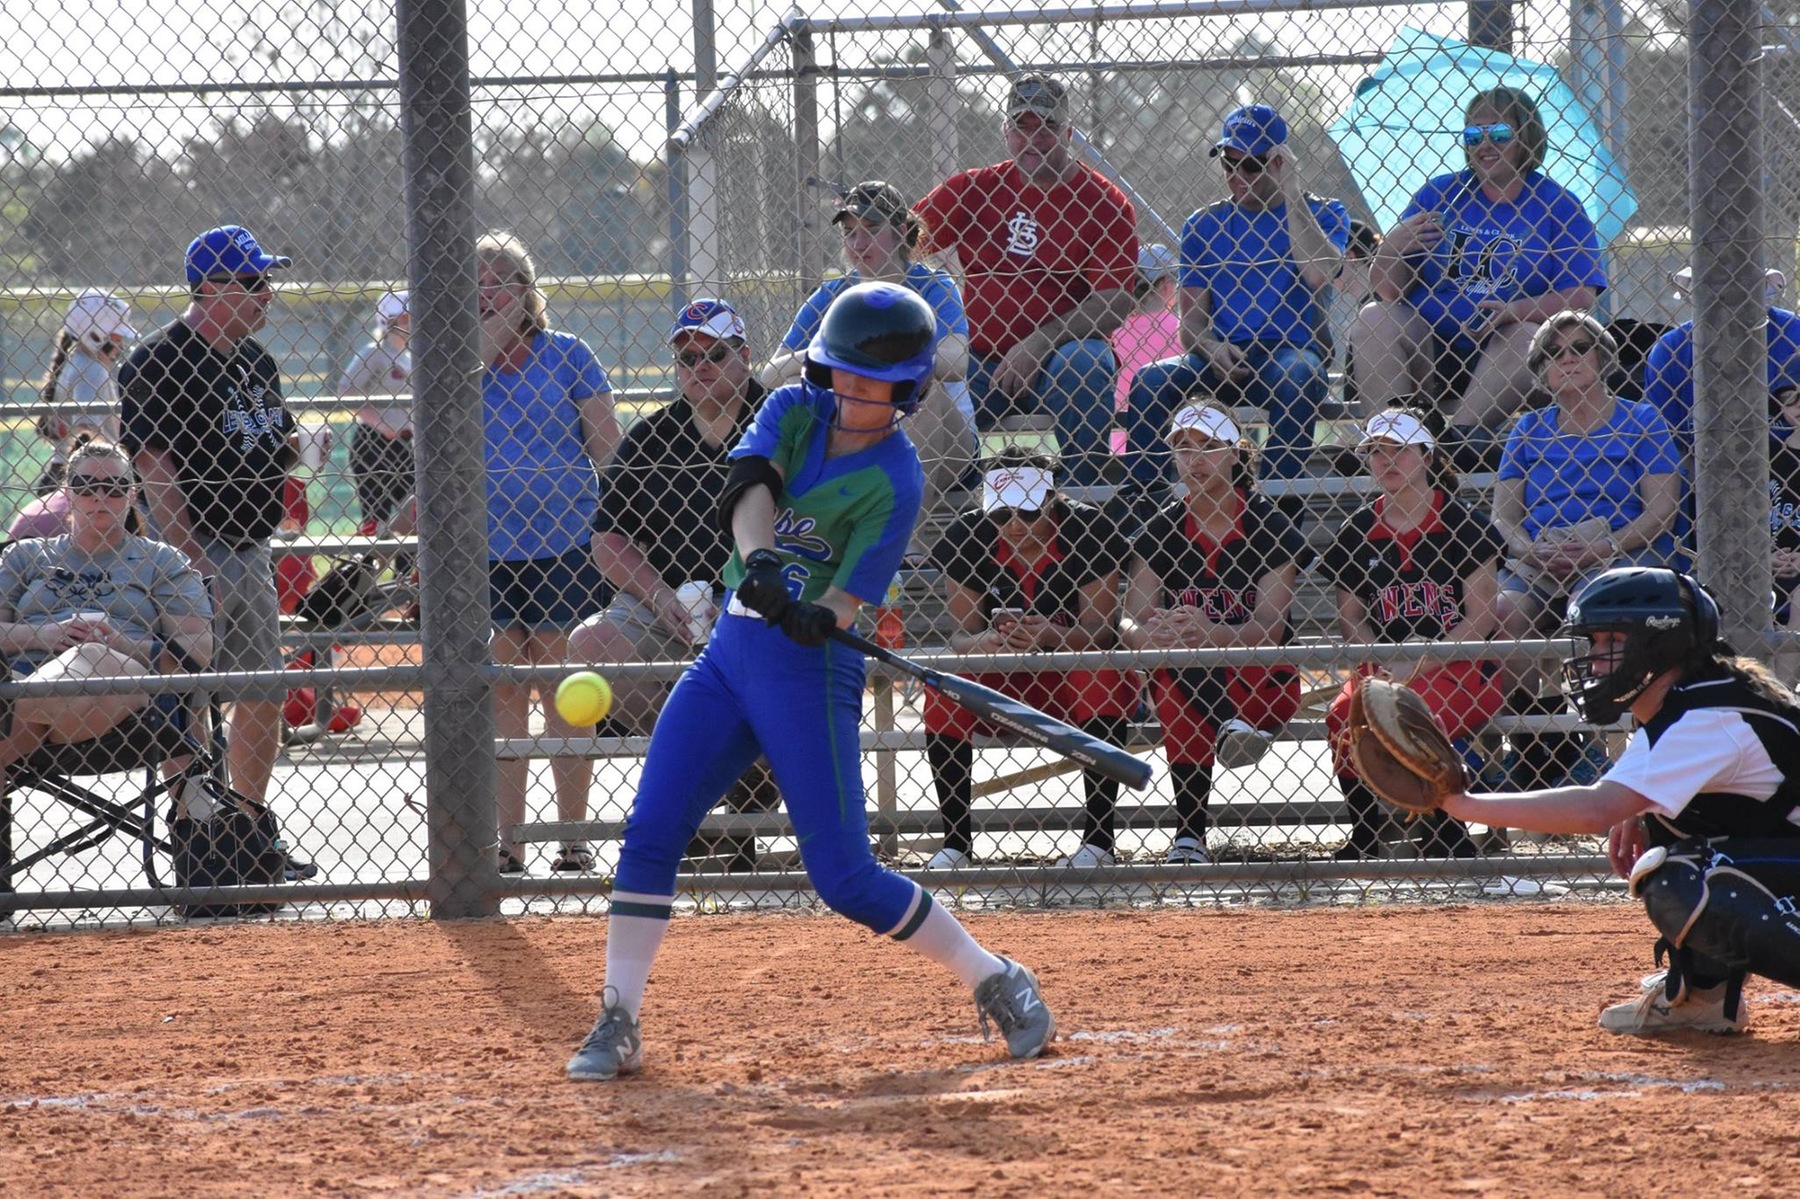 Emily LaFave mid swing, about to hit a pitch